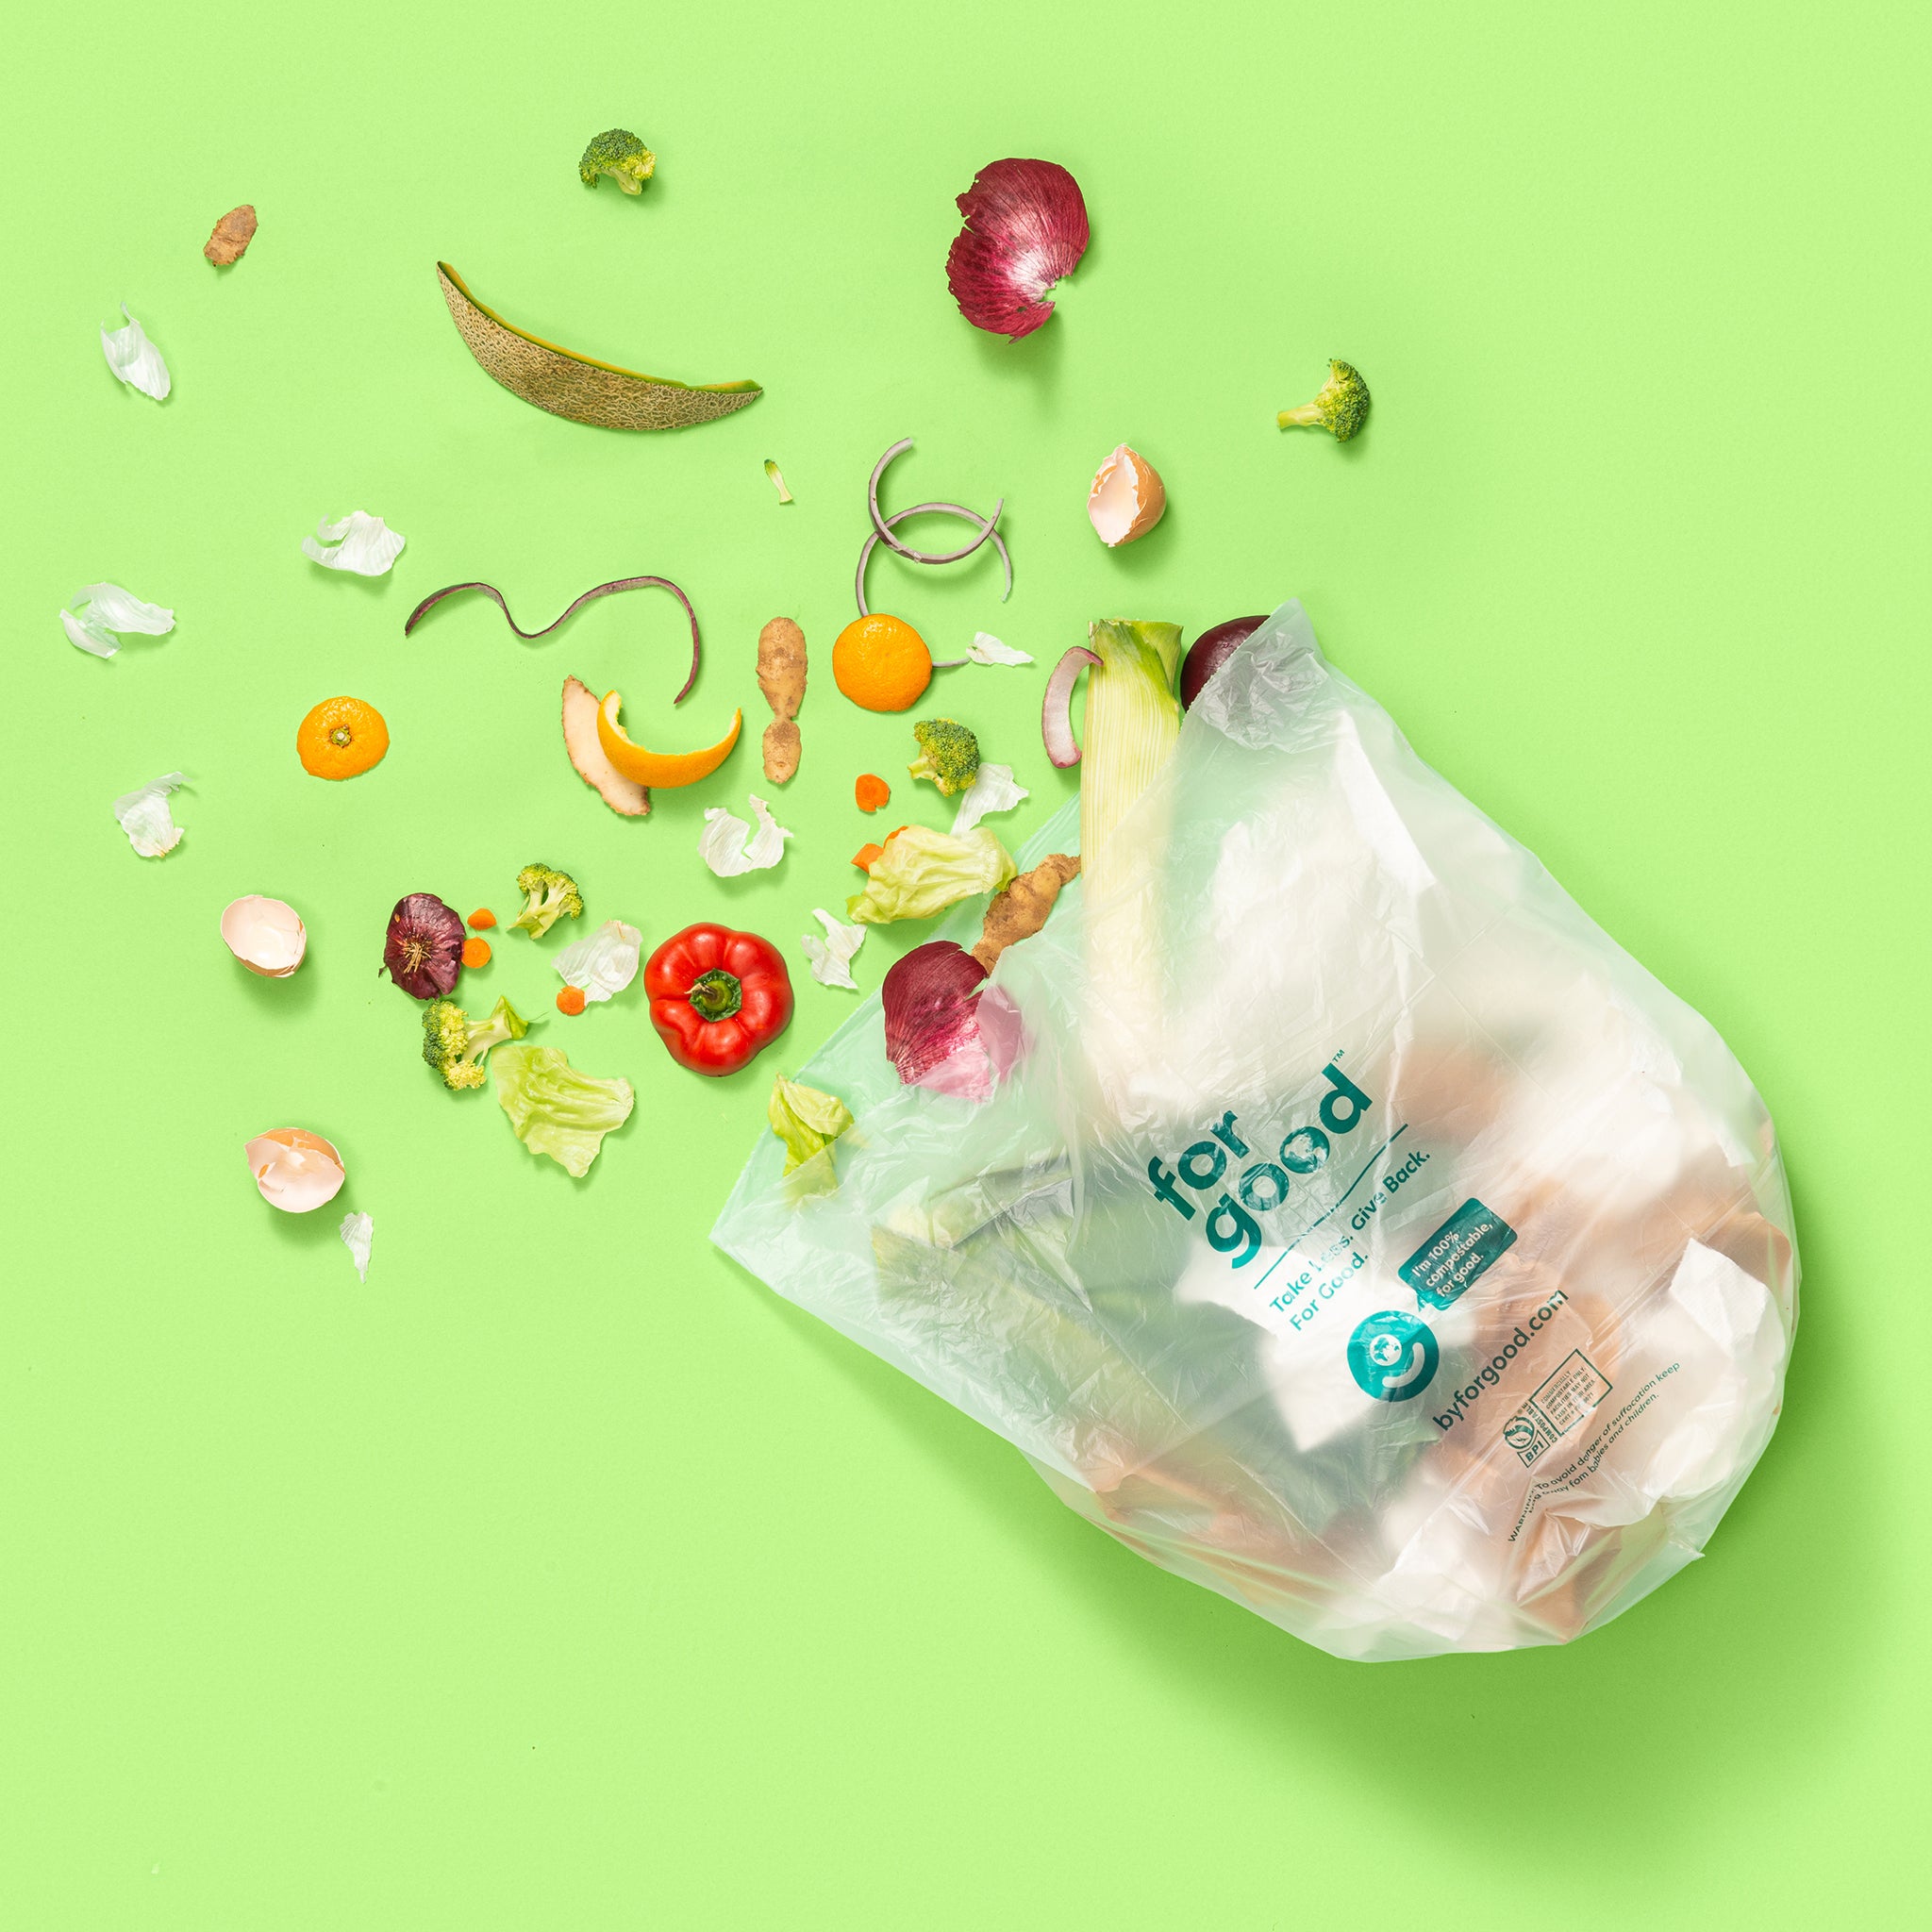 for Good Compostable 3 Gallon Food Scrap Bags